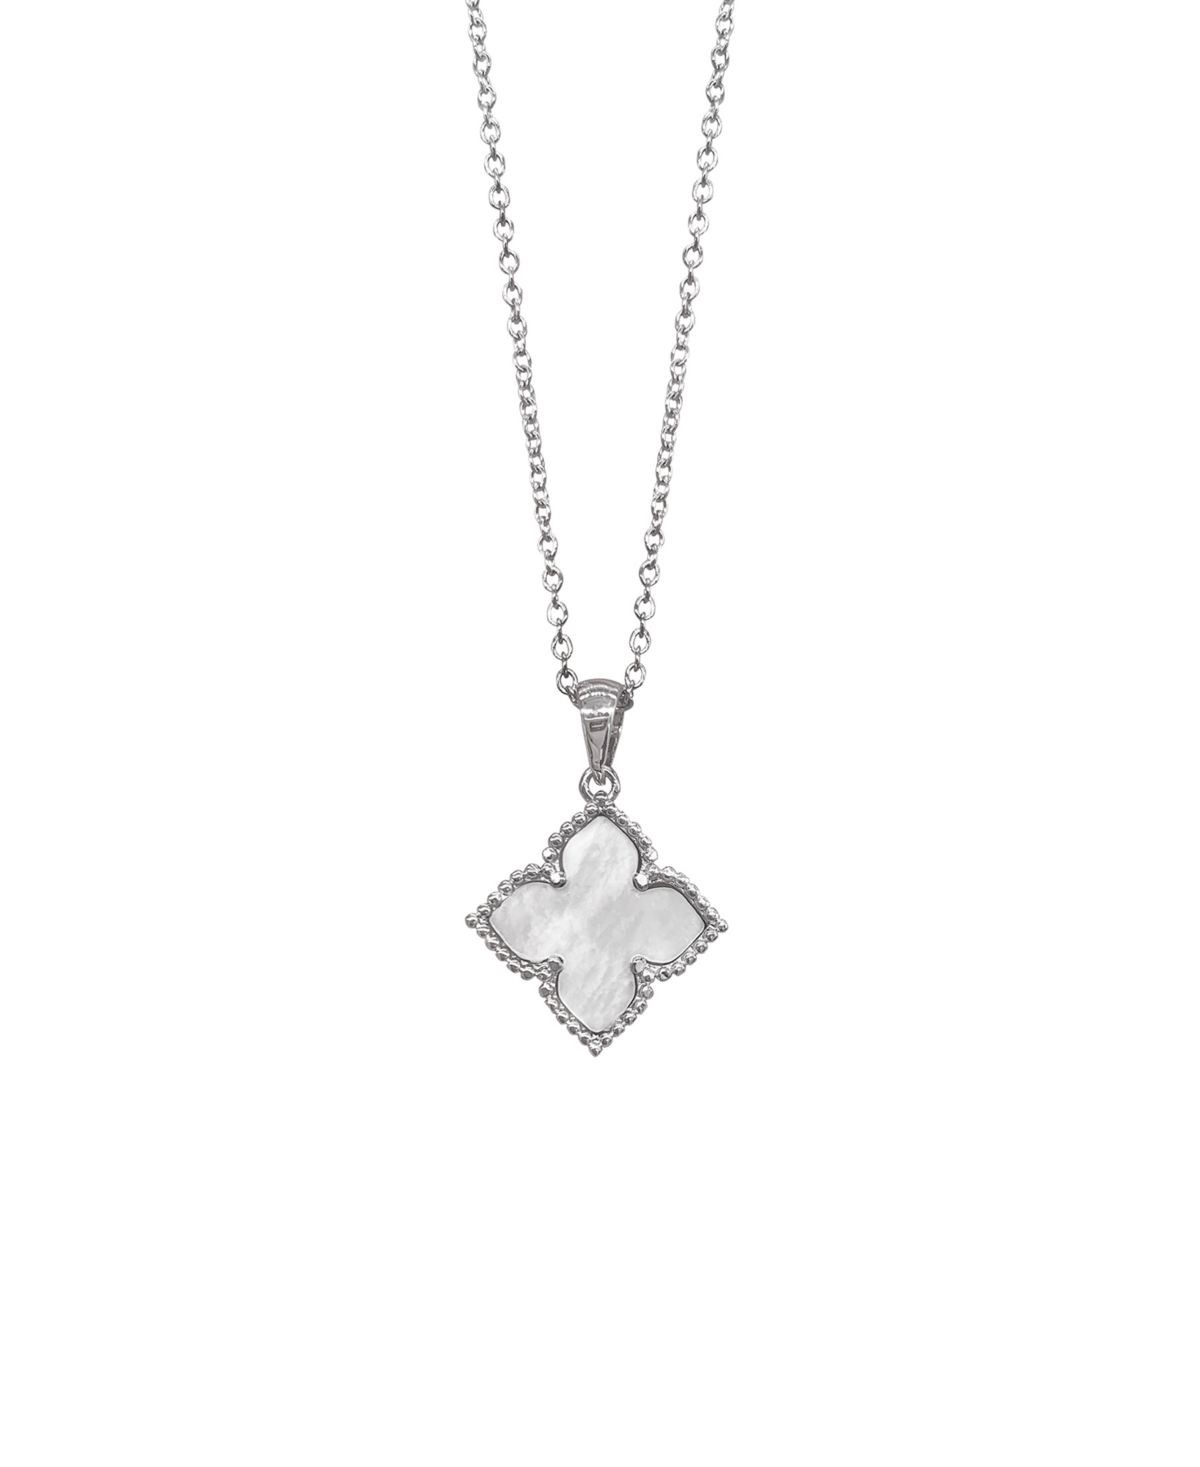 Flower Mother of Pearl Necklace - Silver-Tone, White